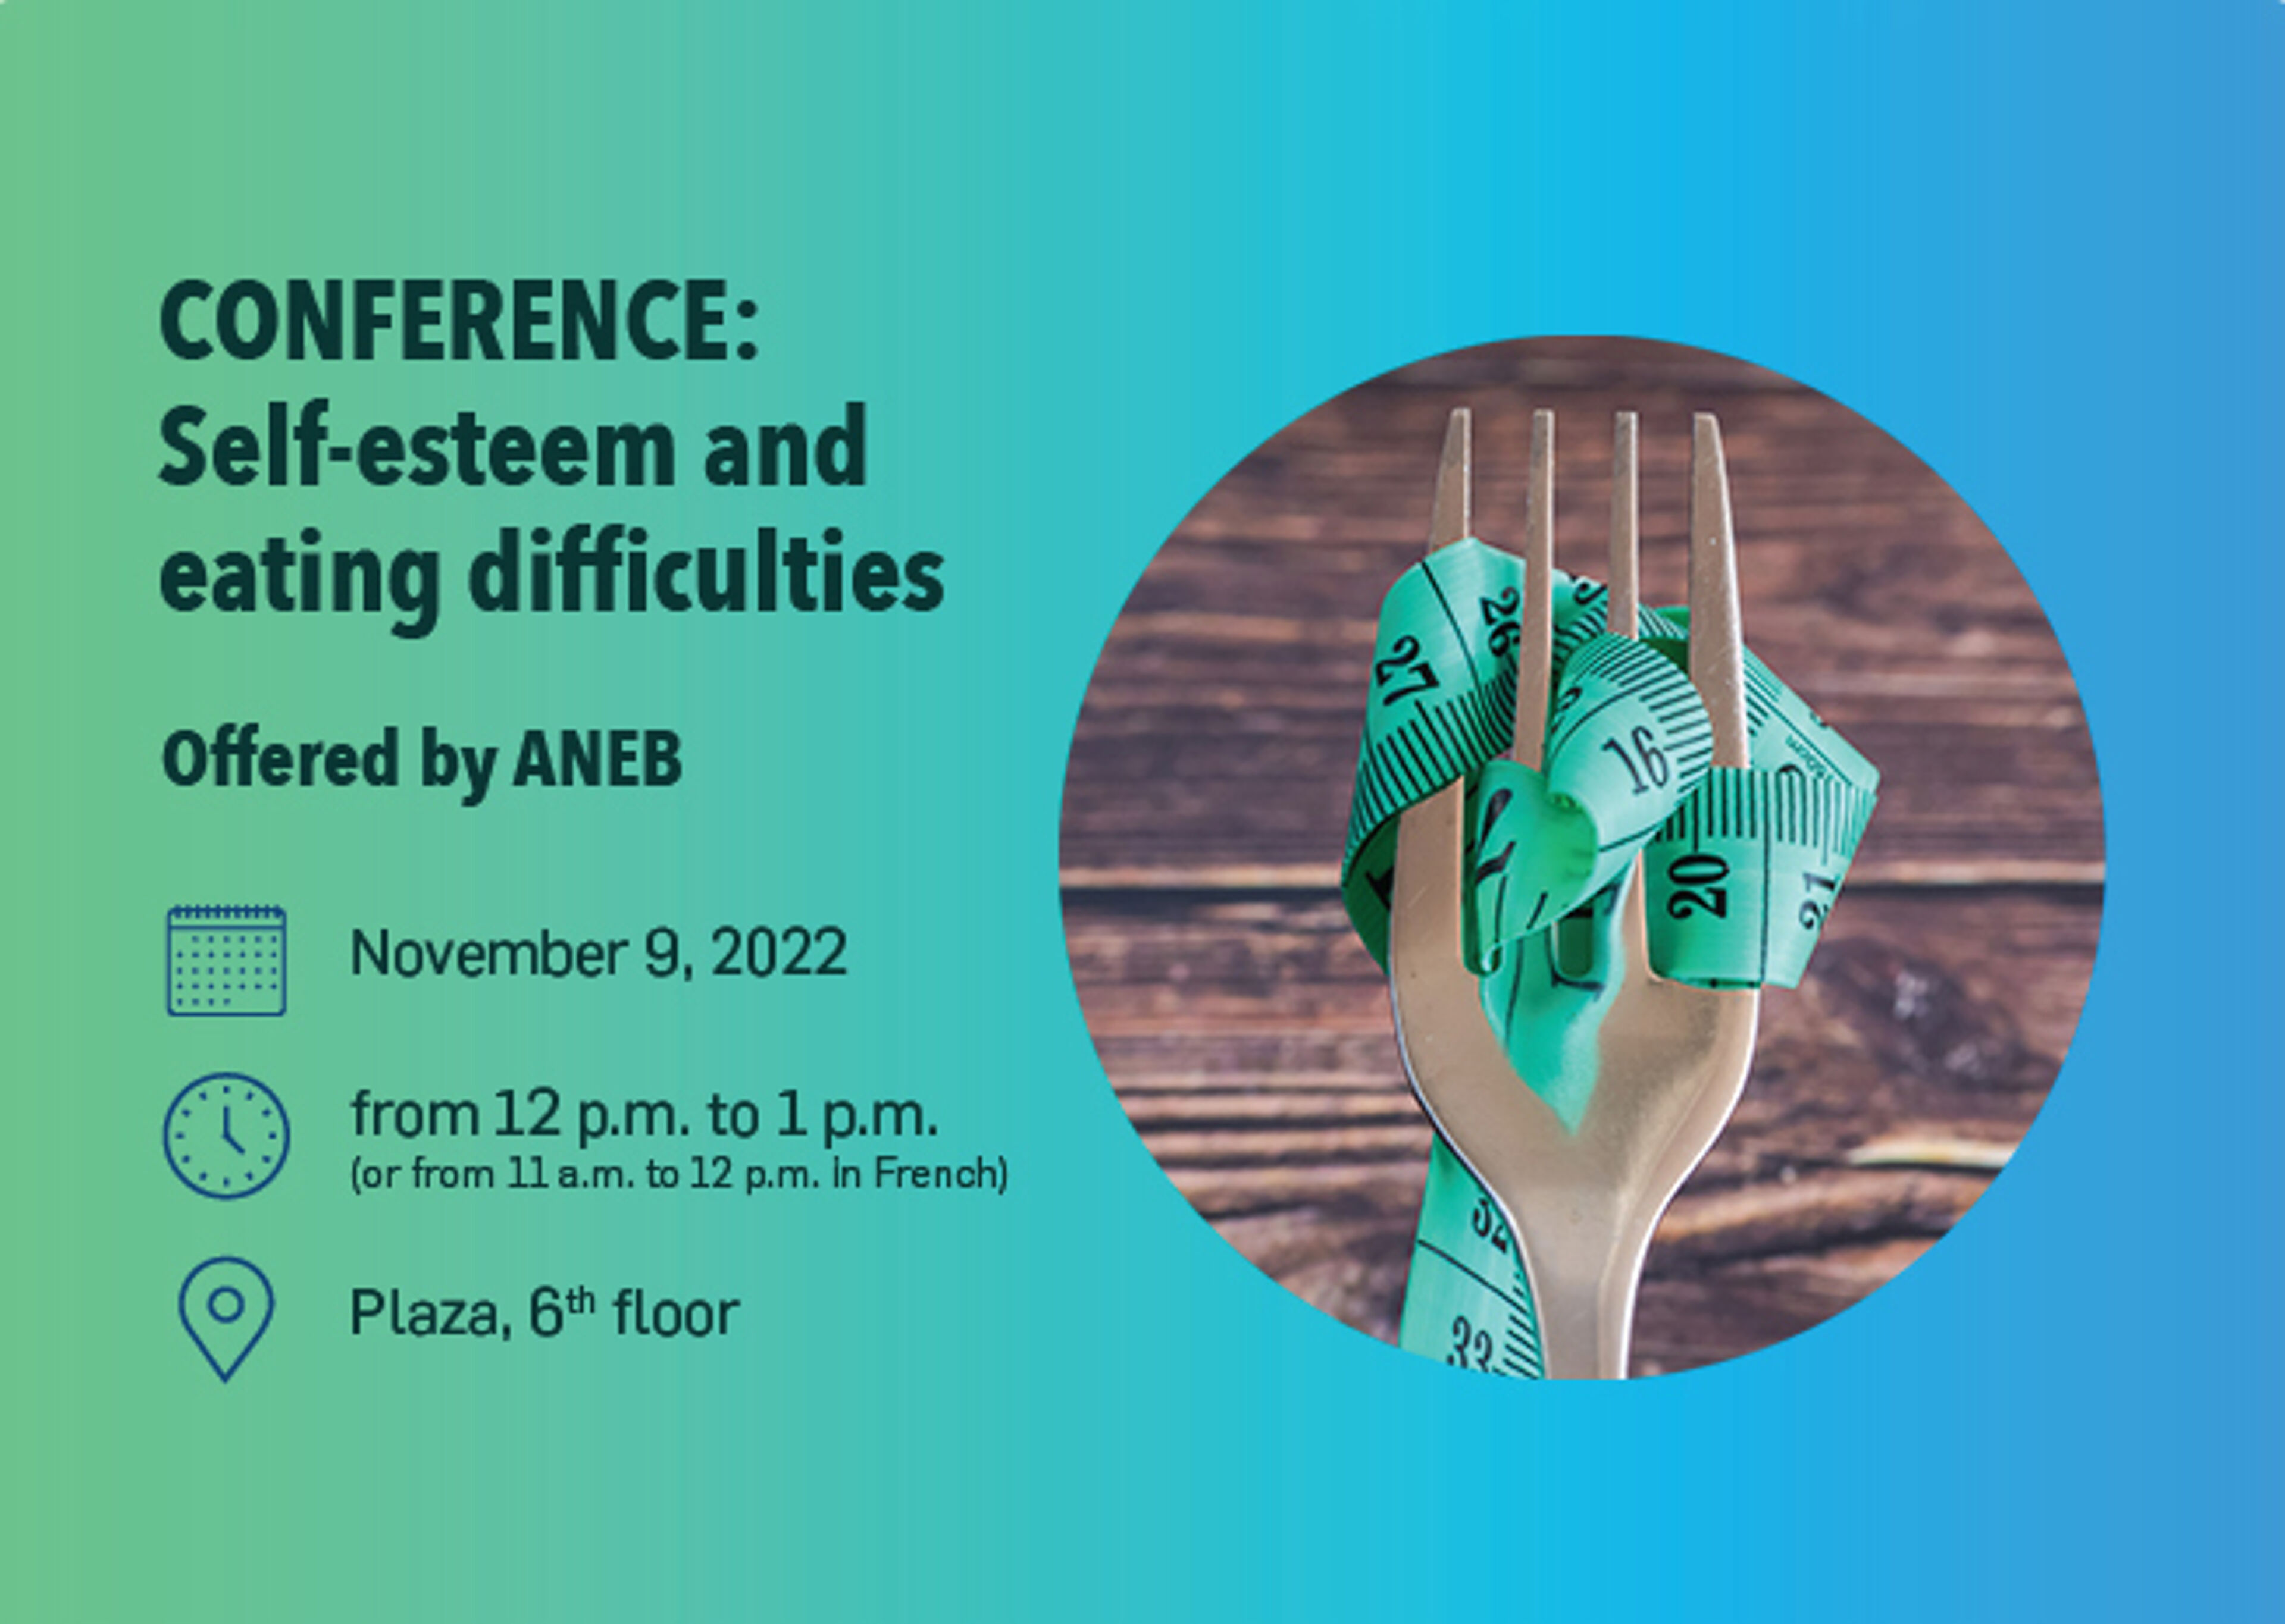 Invitation to a conference on self-esteem and eating difficulties, offered by ANEB on November 9, 2022, from 12 p.m. to 1 p.m. at Plaza, 6th floor.